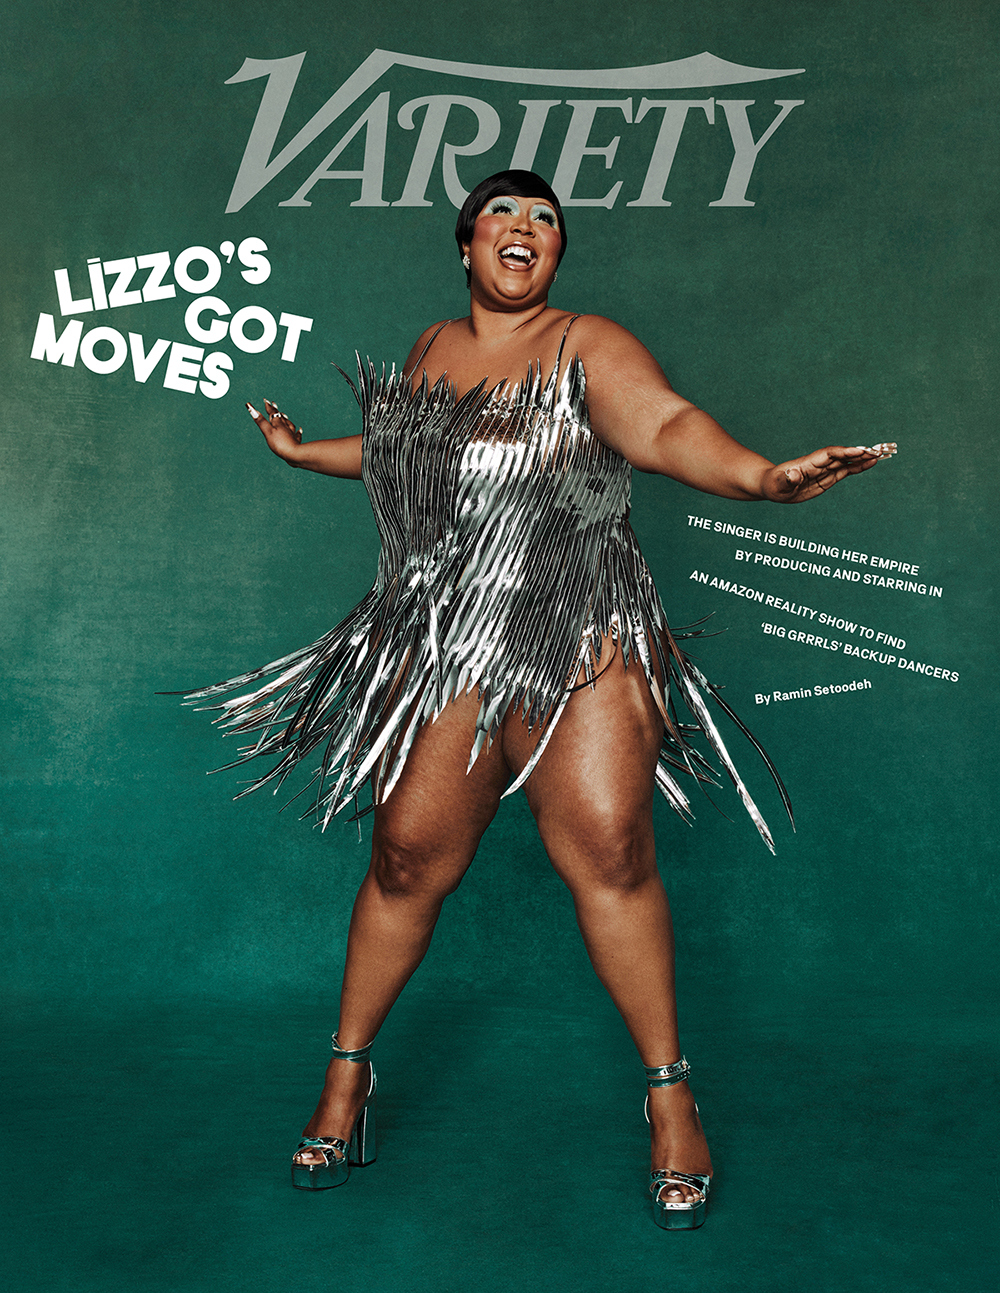 Lizzo Continues to Delight, This Time on the Cover of Variety Go Fug